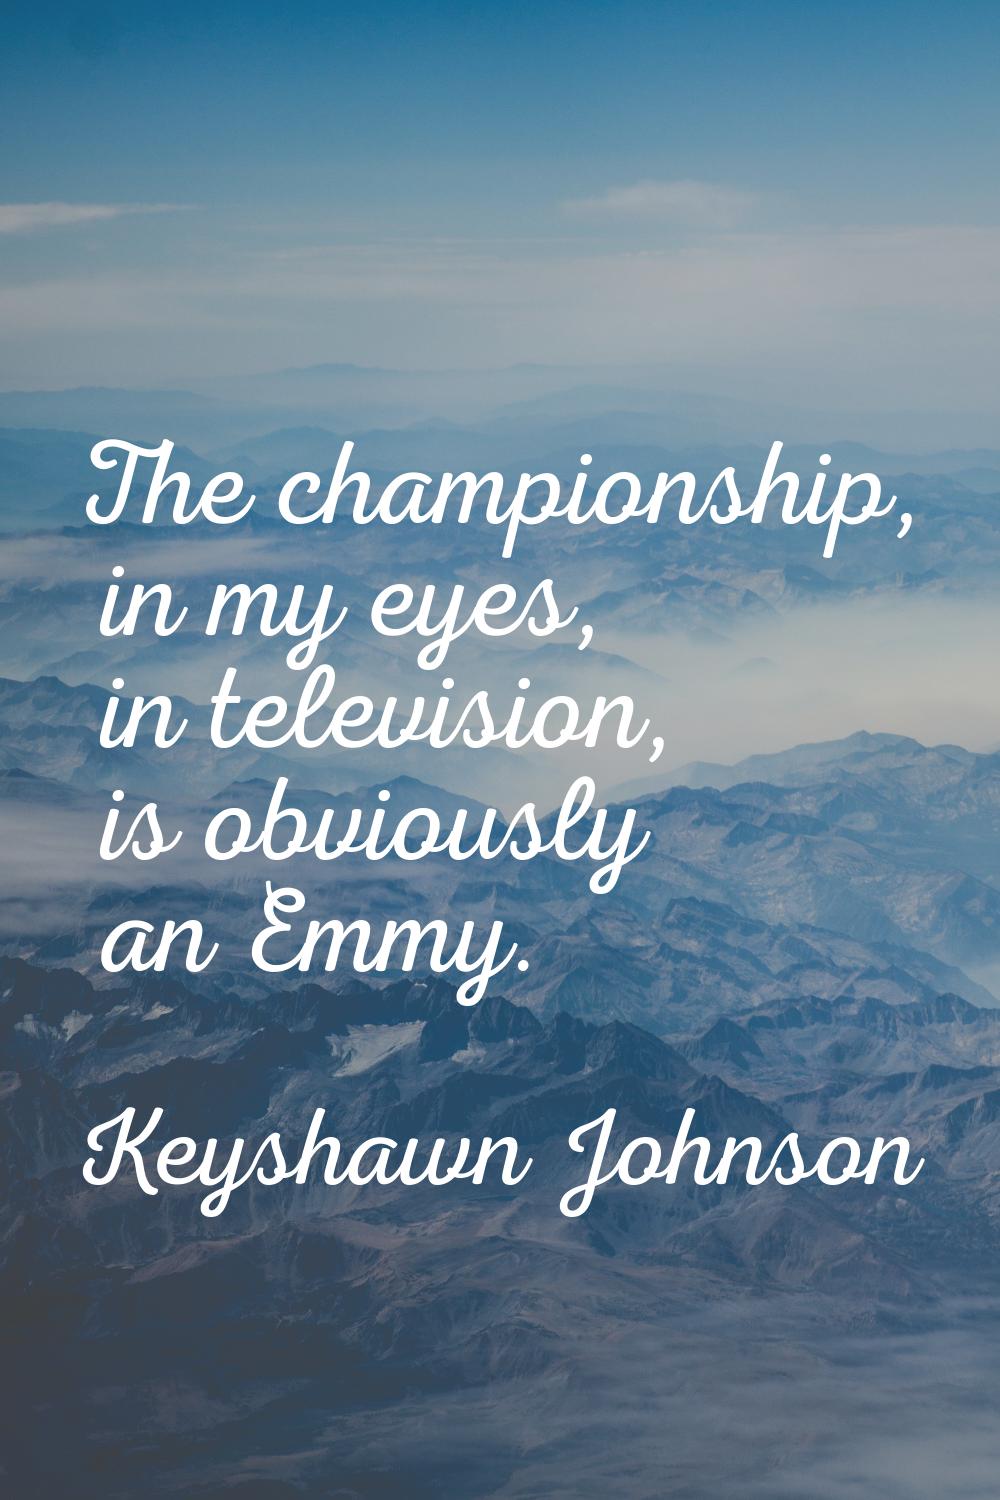 The championship, in my eyes, in television, is obviously an Emmy.